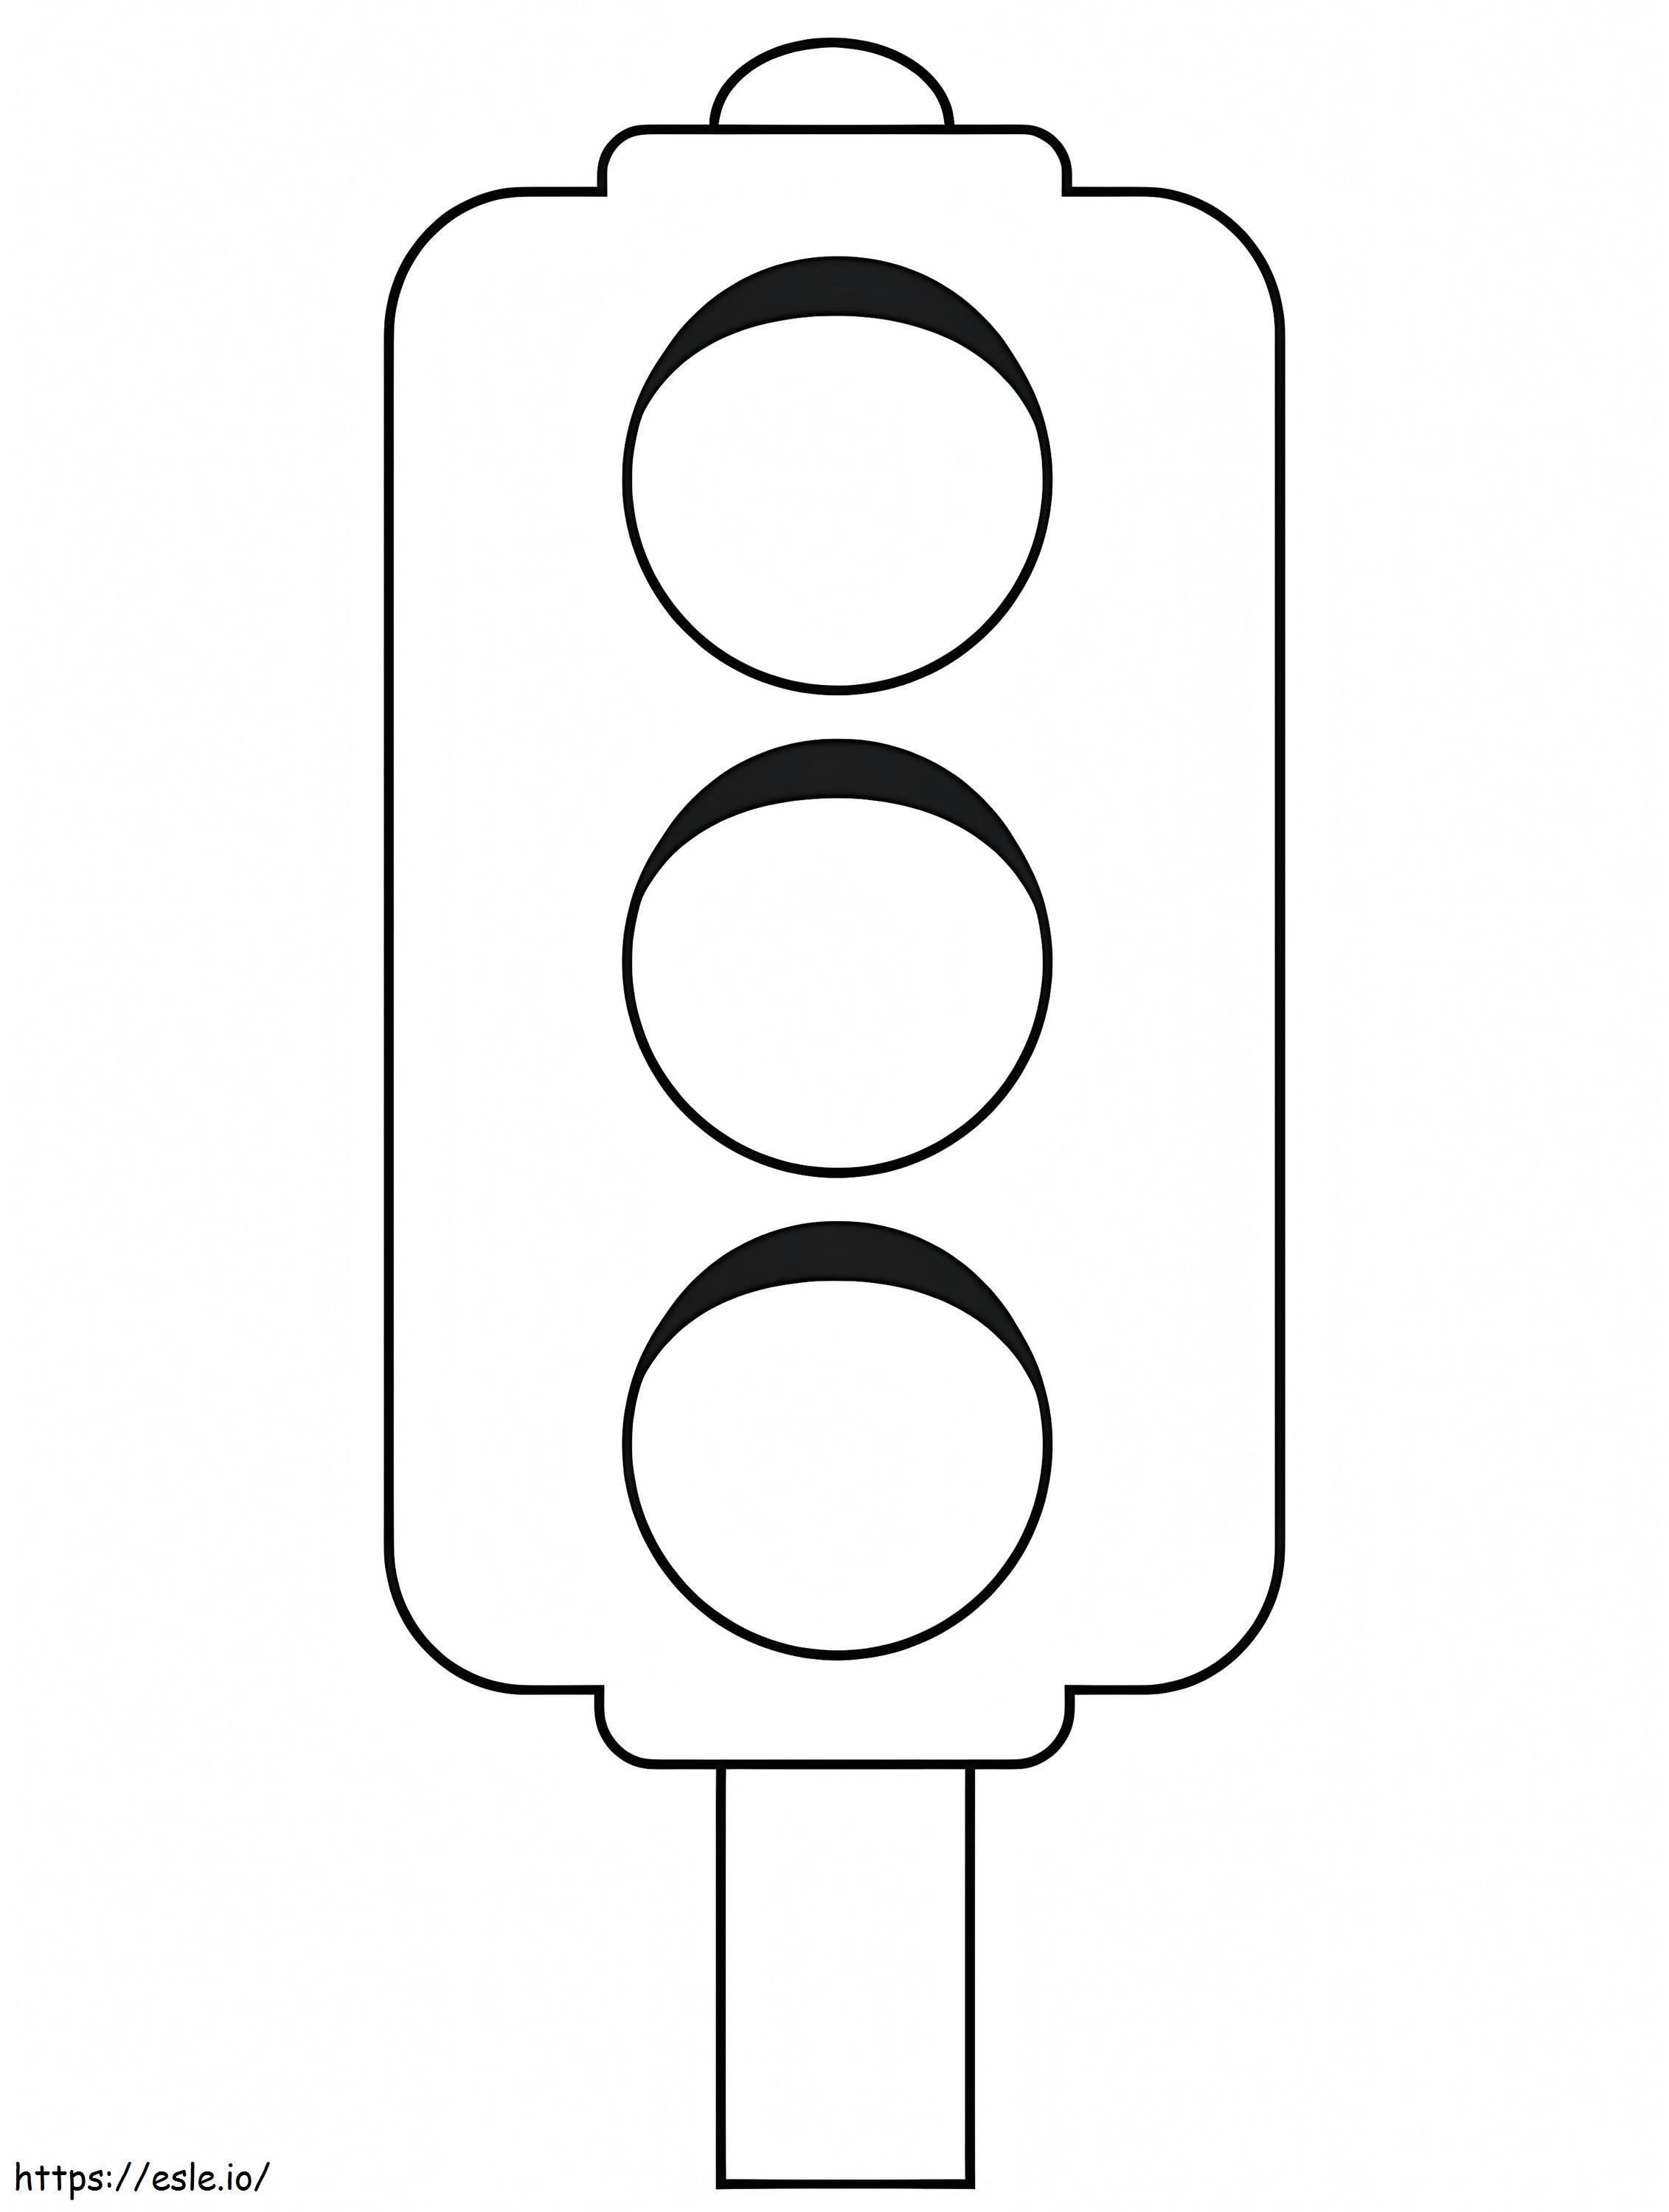 Easy Printable Traffic Light coloring page